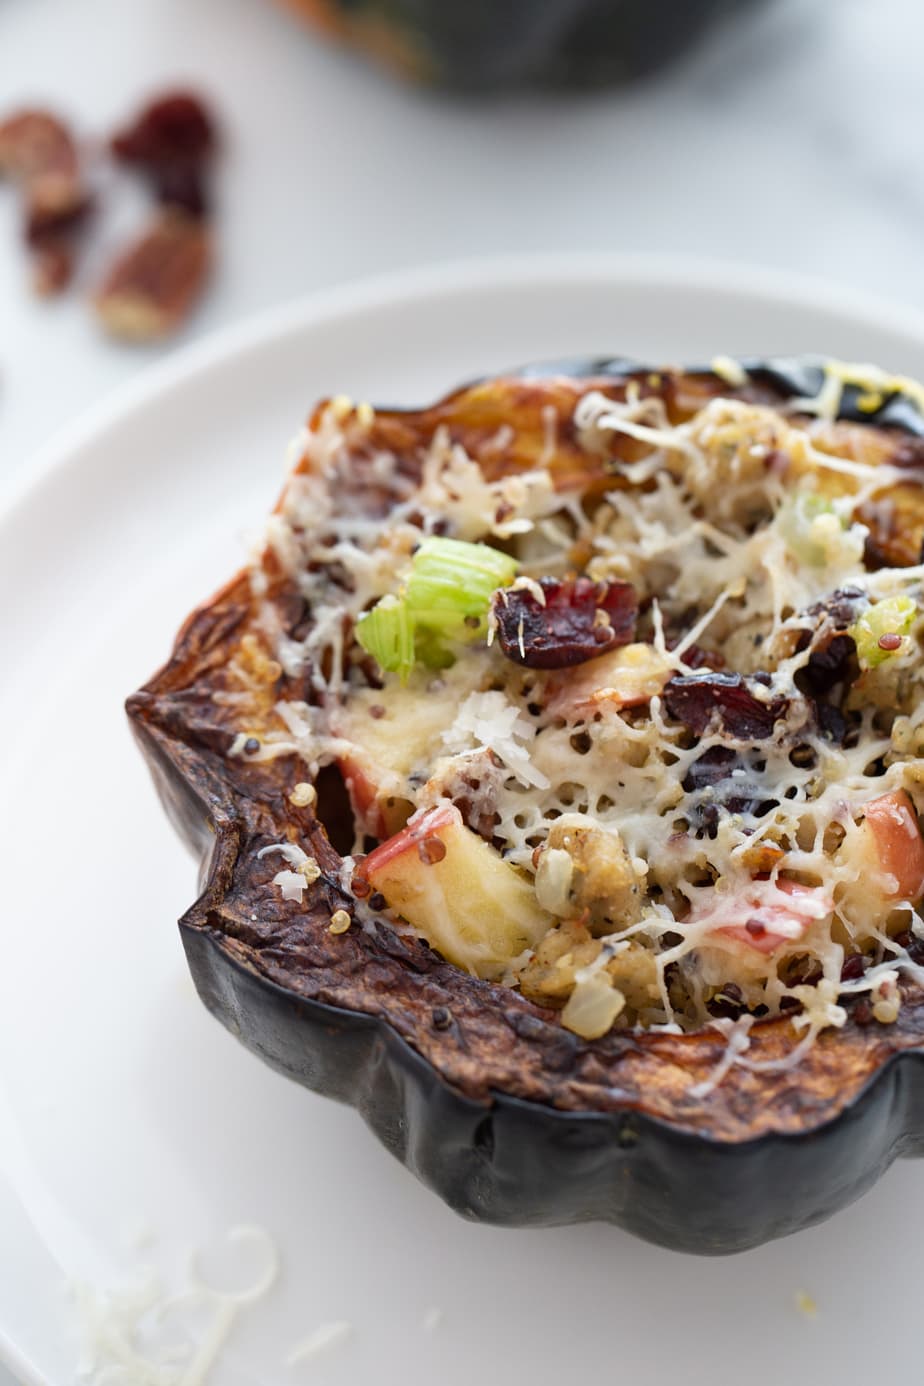 Acorn squash stuffed with sausage, quinoa, apple, celery, and cranberries then topped with shredded cheese and cooked in the Air Fryer.